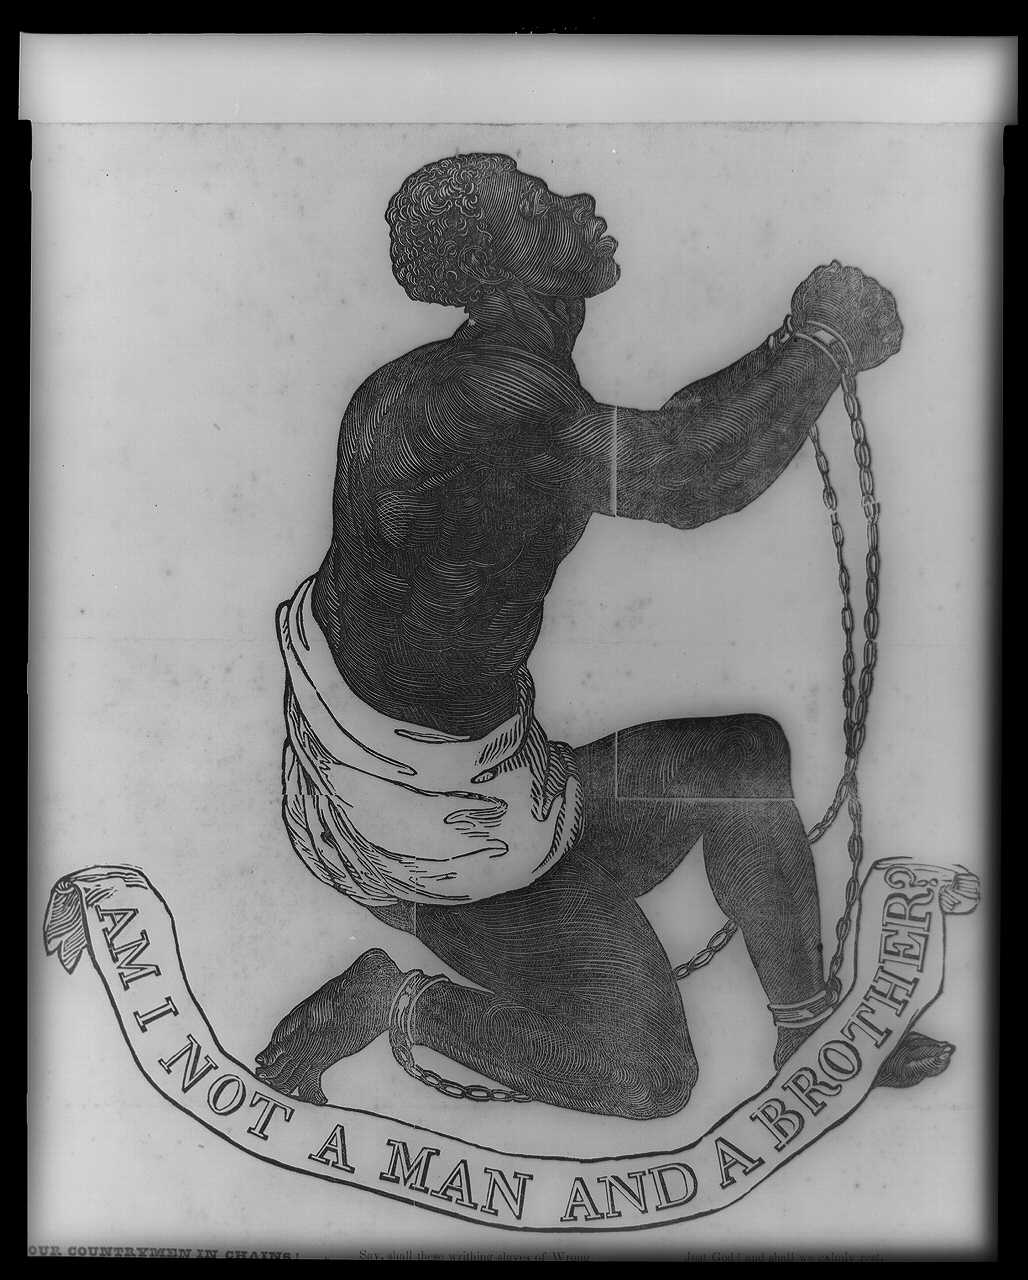 Woodcut illustration of a male slave in chains. Image courtesy of Library of Congress Rare Book and Special Collections Division, Washington, D.C.